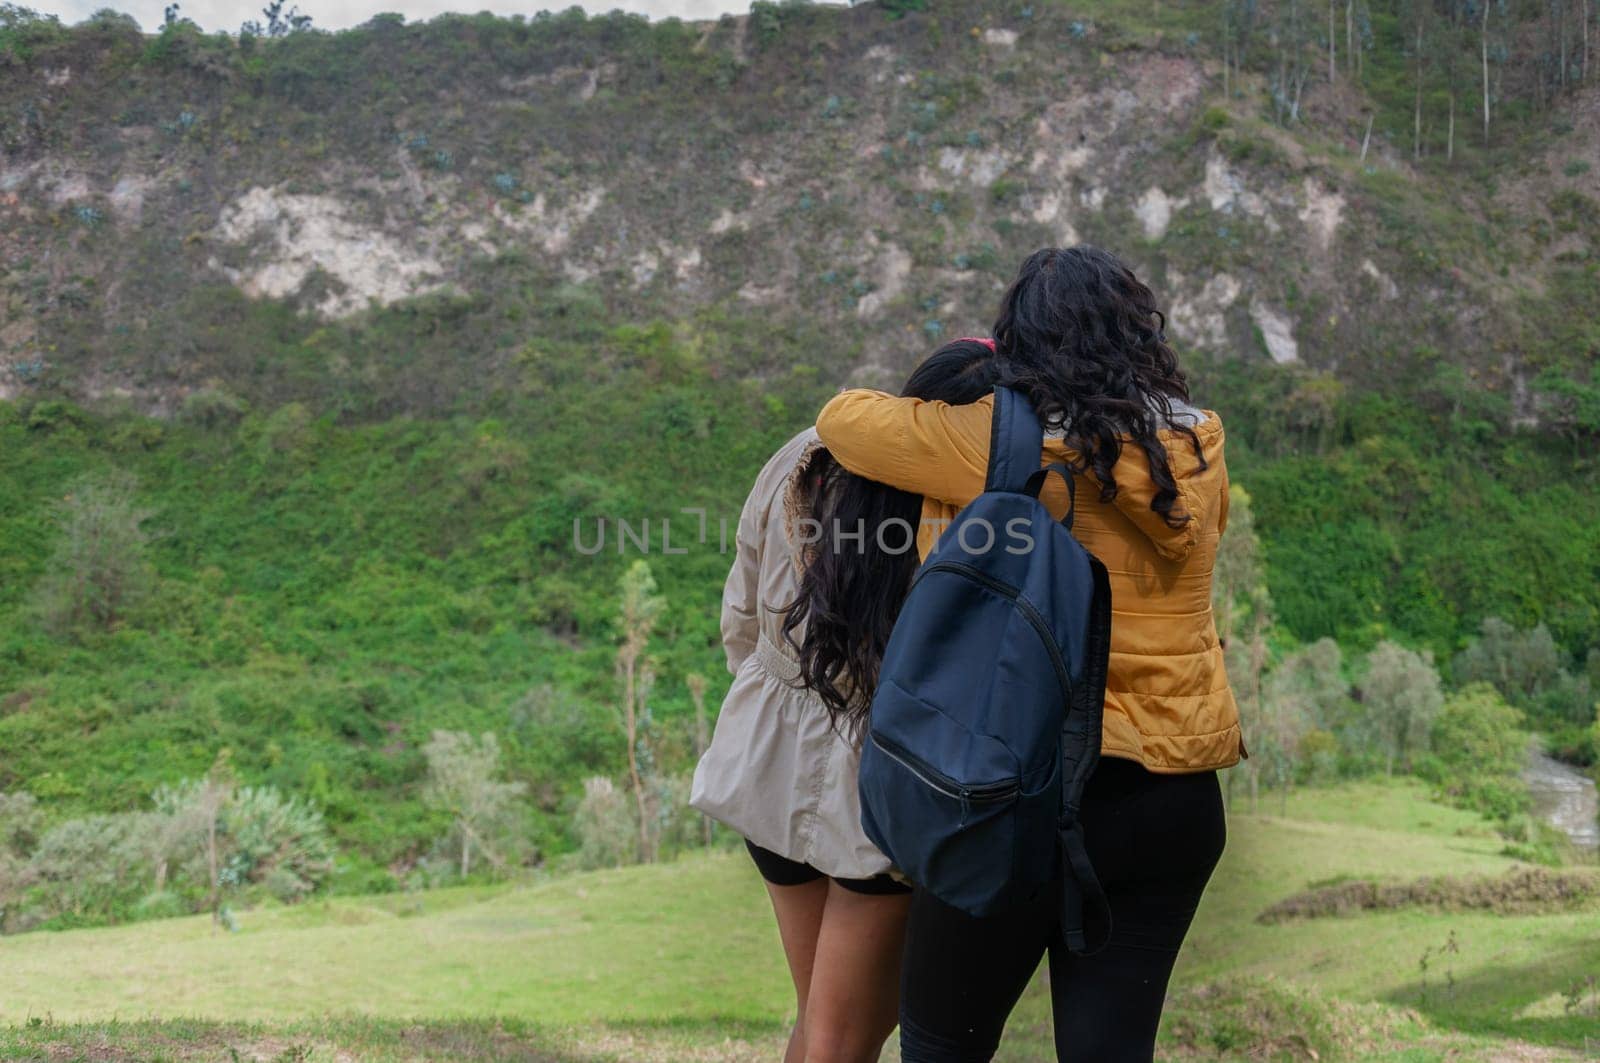 two girls hugging each other, demonstrating the love they feel for each other while breathing the pure mountain air by Raulmartin